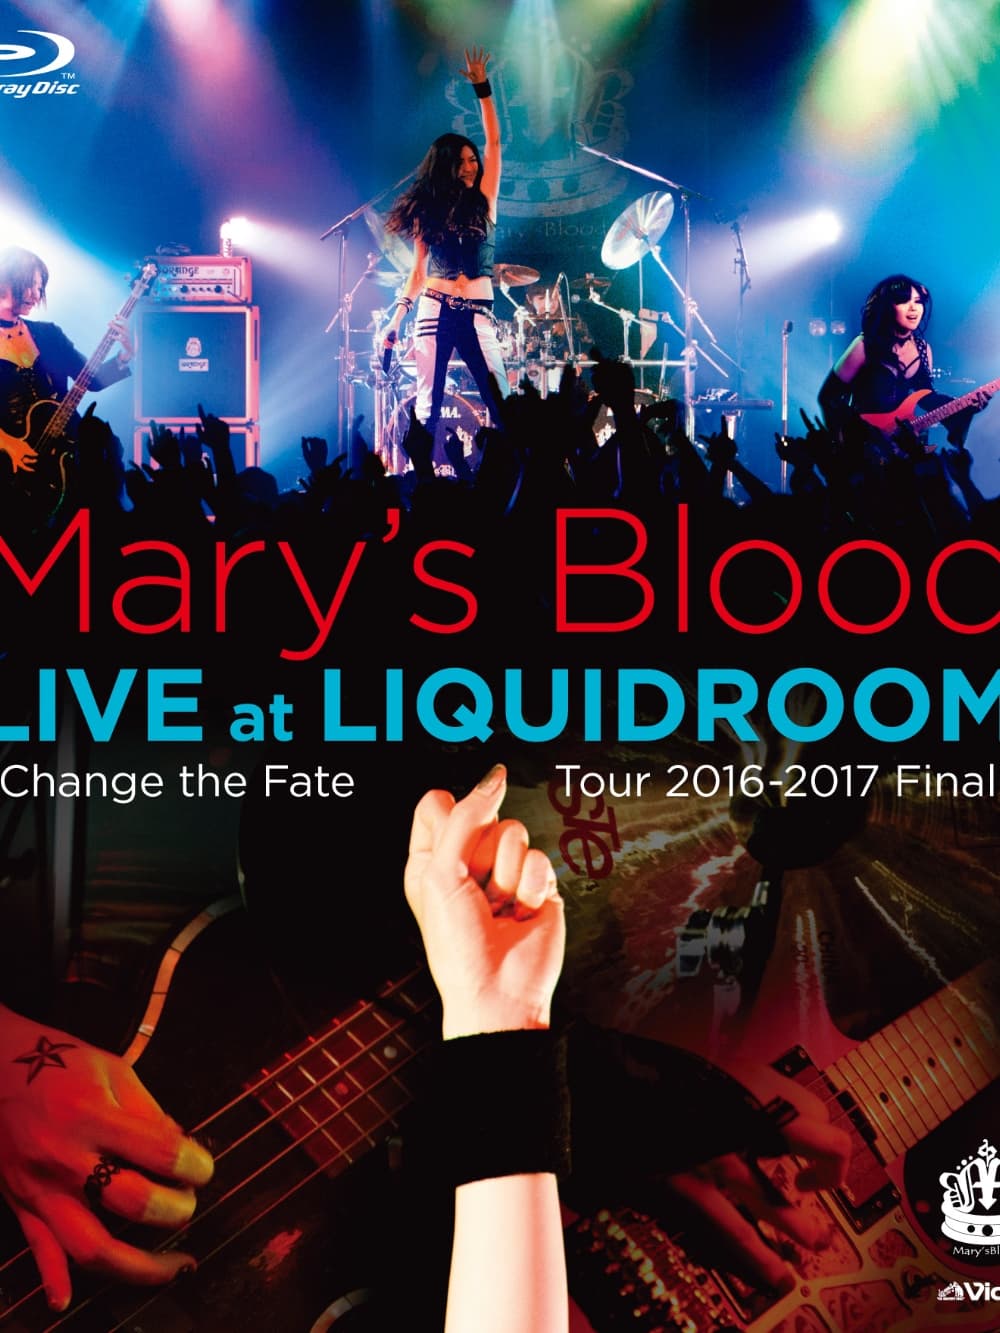 Mary's Blood LIVE at LIQUIDROOM ~Change the Fate Tour 2016-2017 Final~